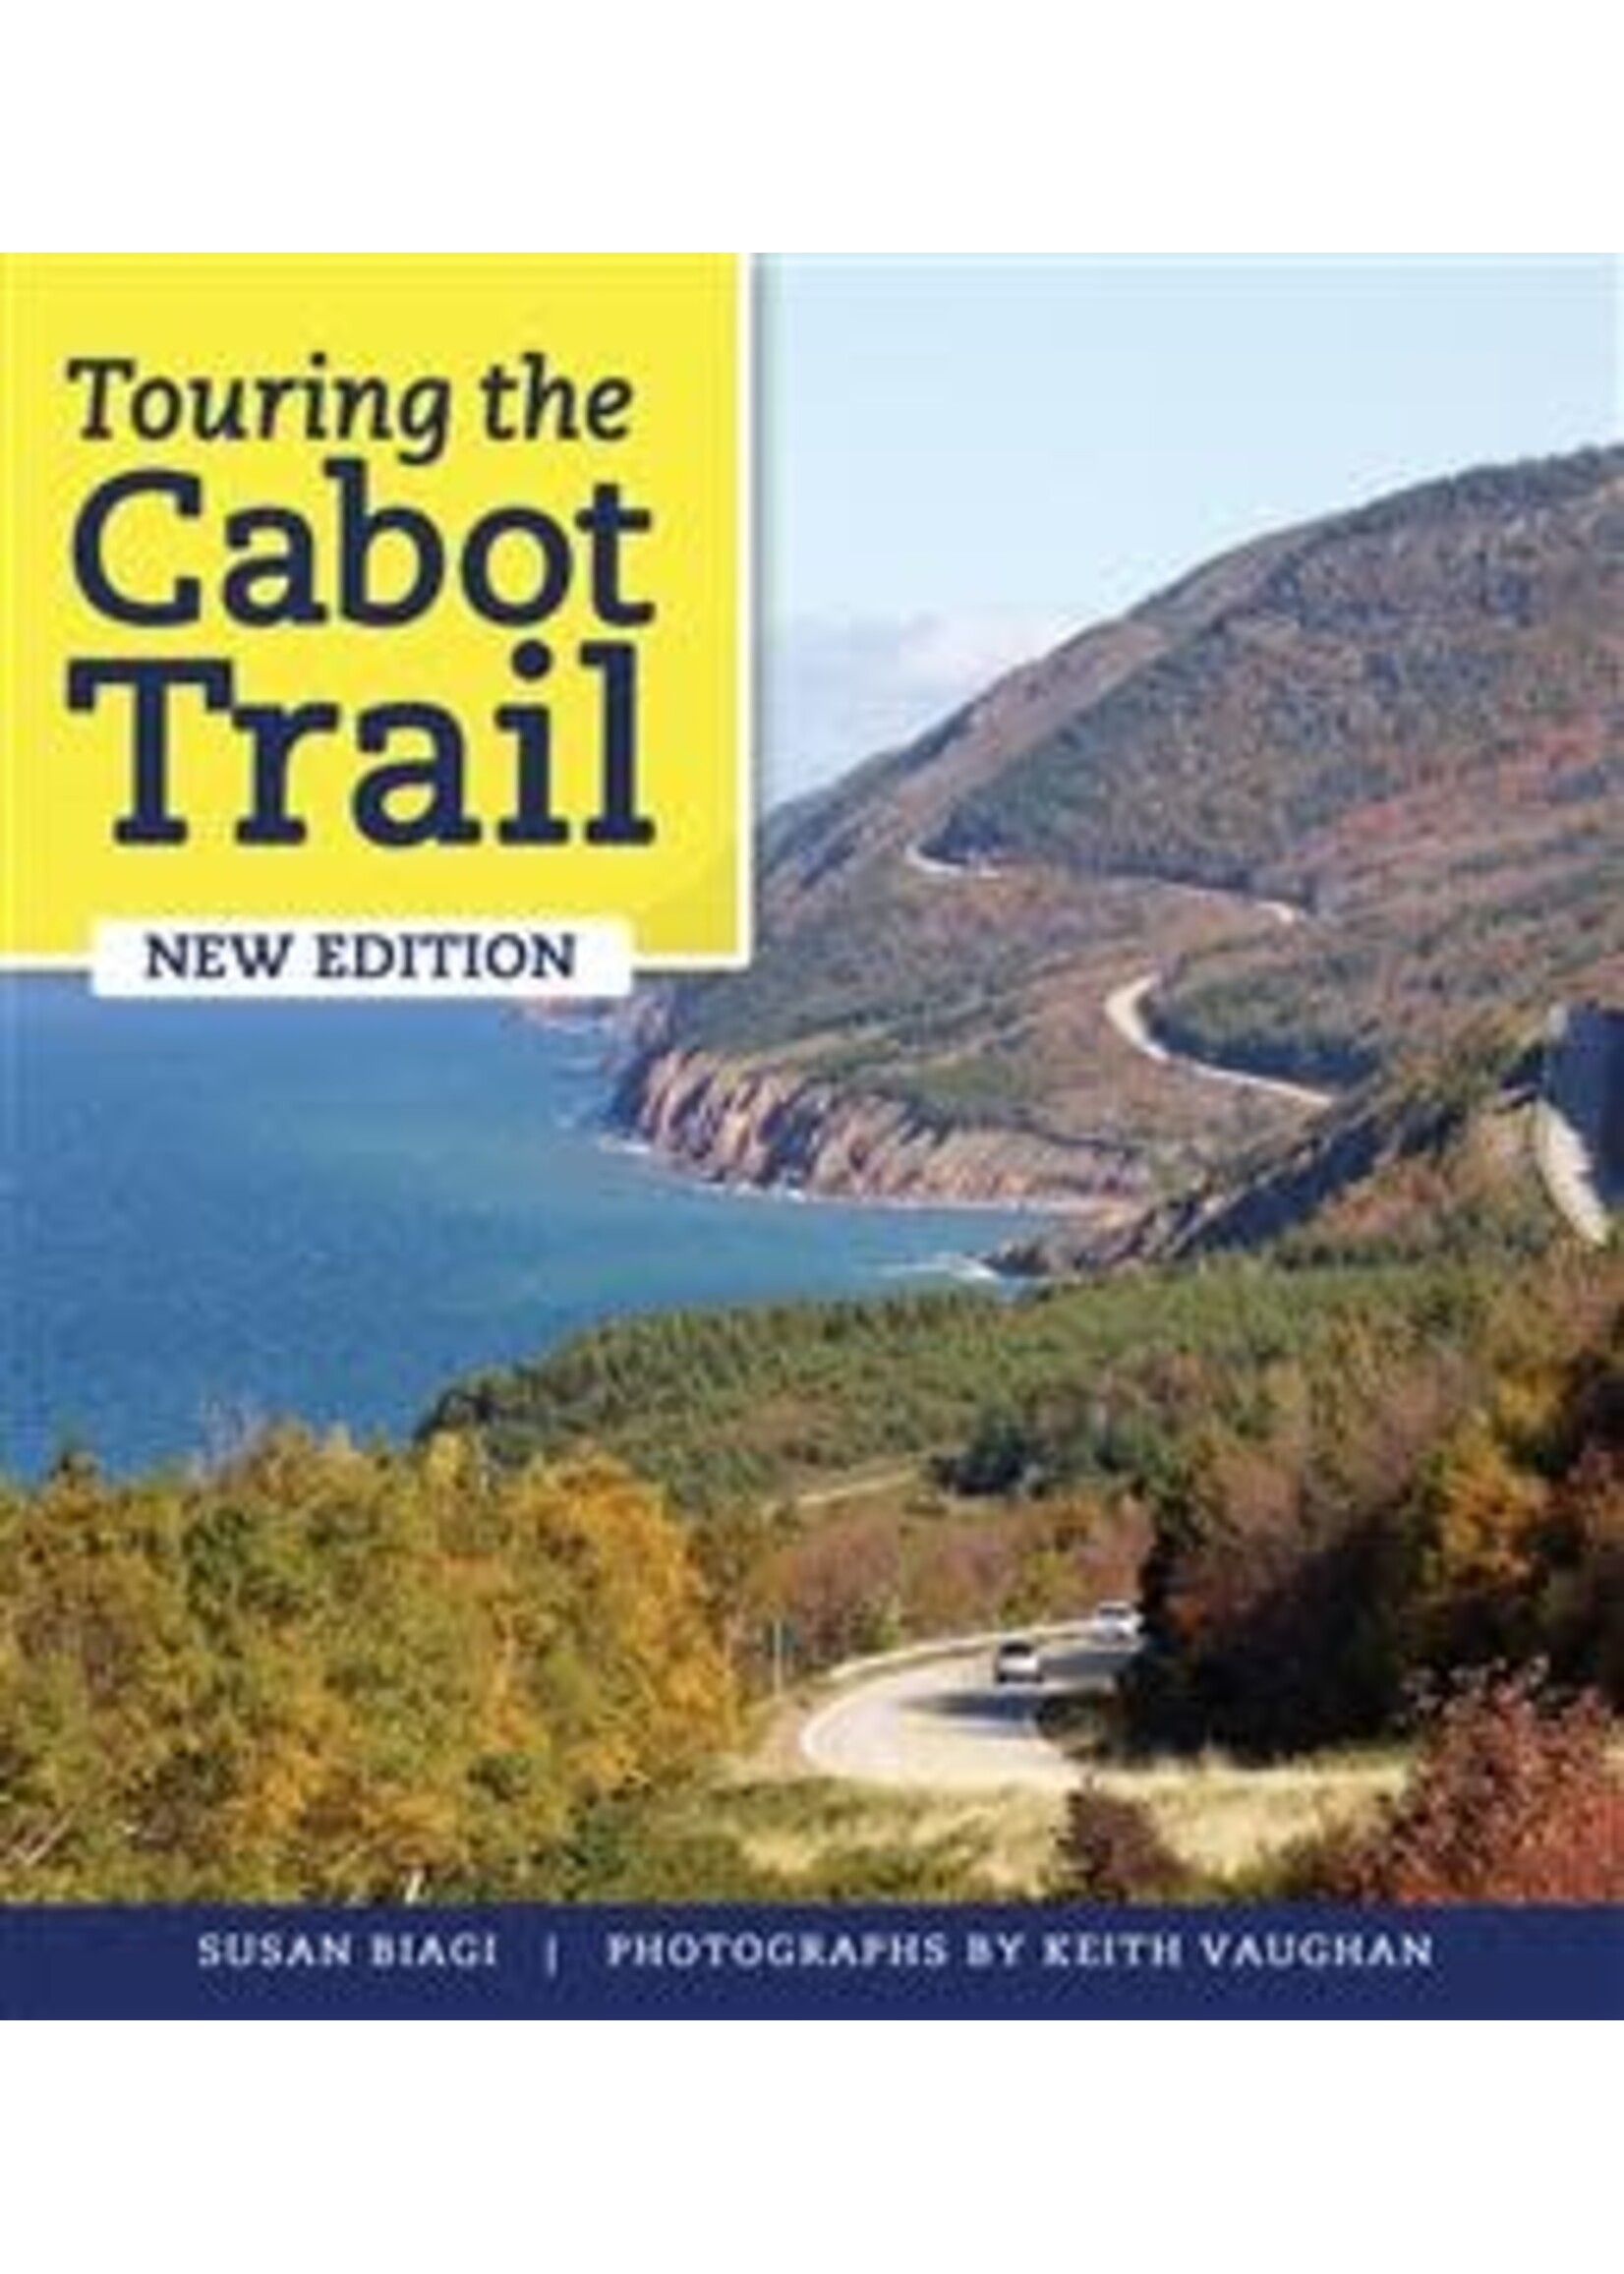 Touring the Cabot Trail and Beyond, 4th Ed. by Keith Vaughan, Susan Biagi